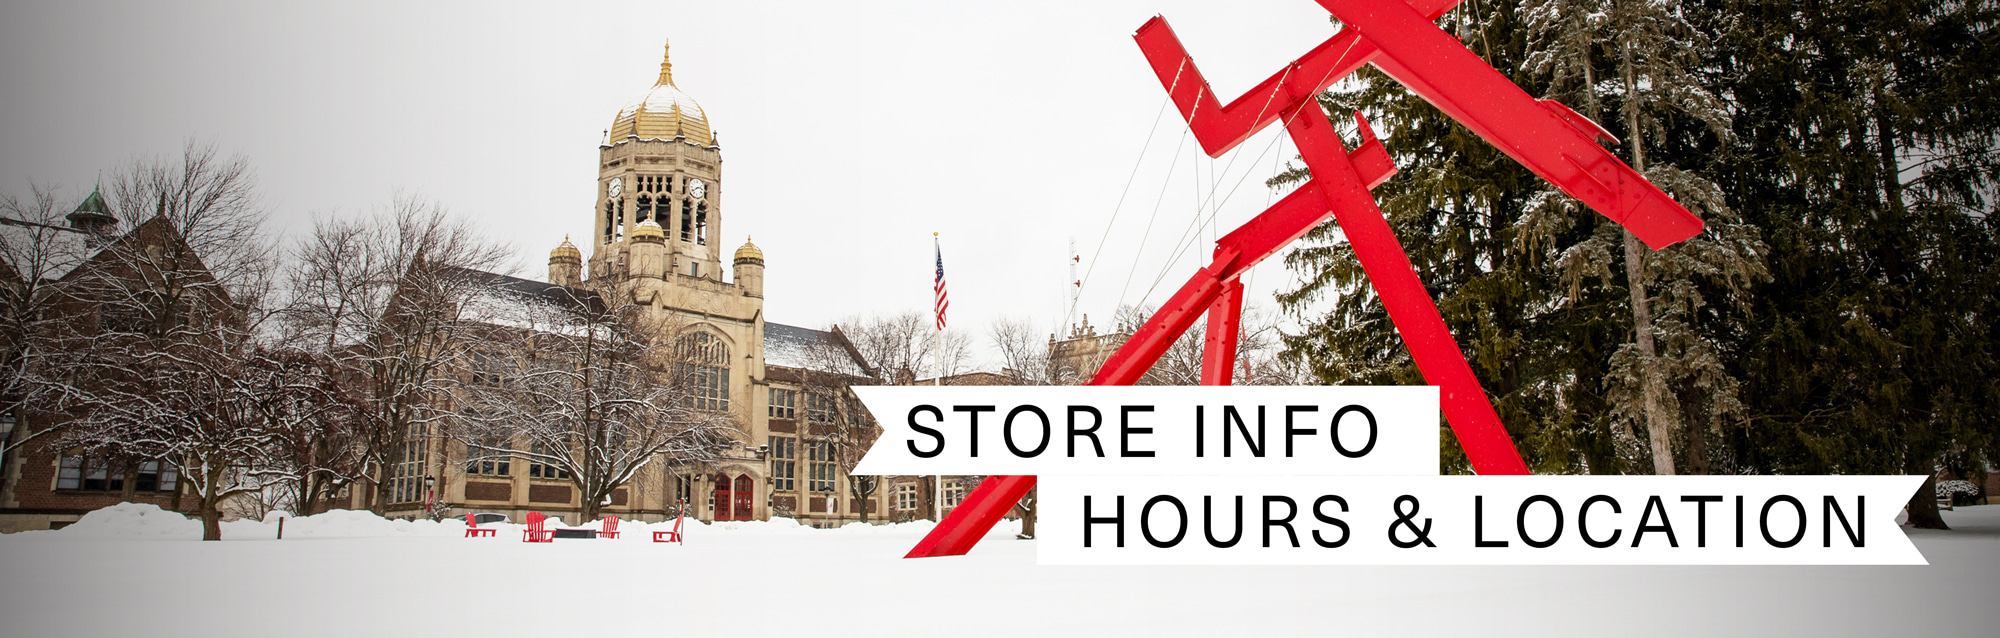 Store Hours Information and Location